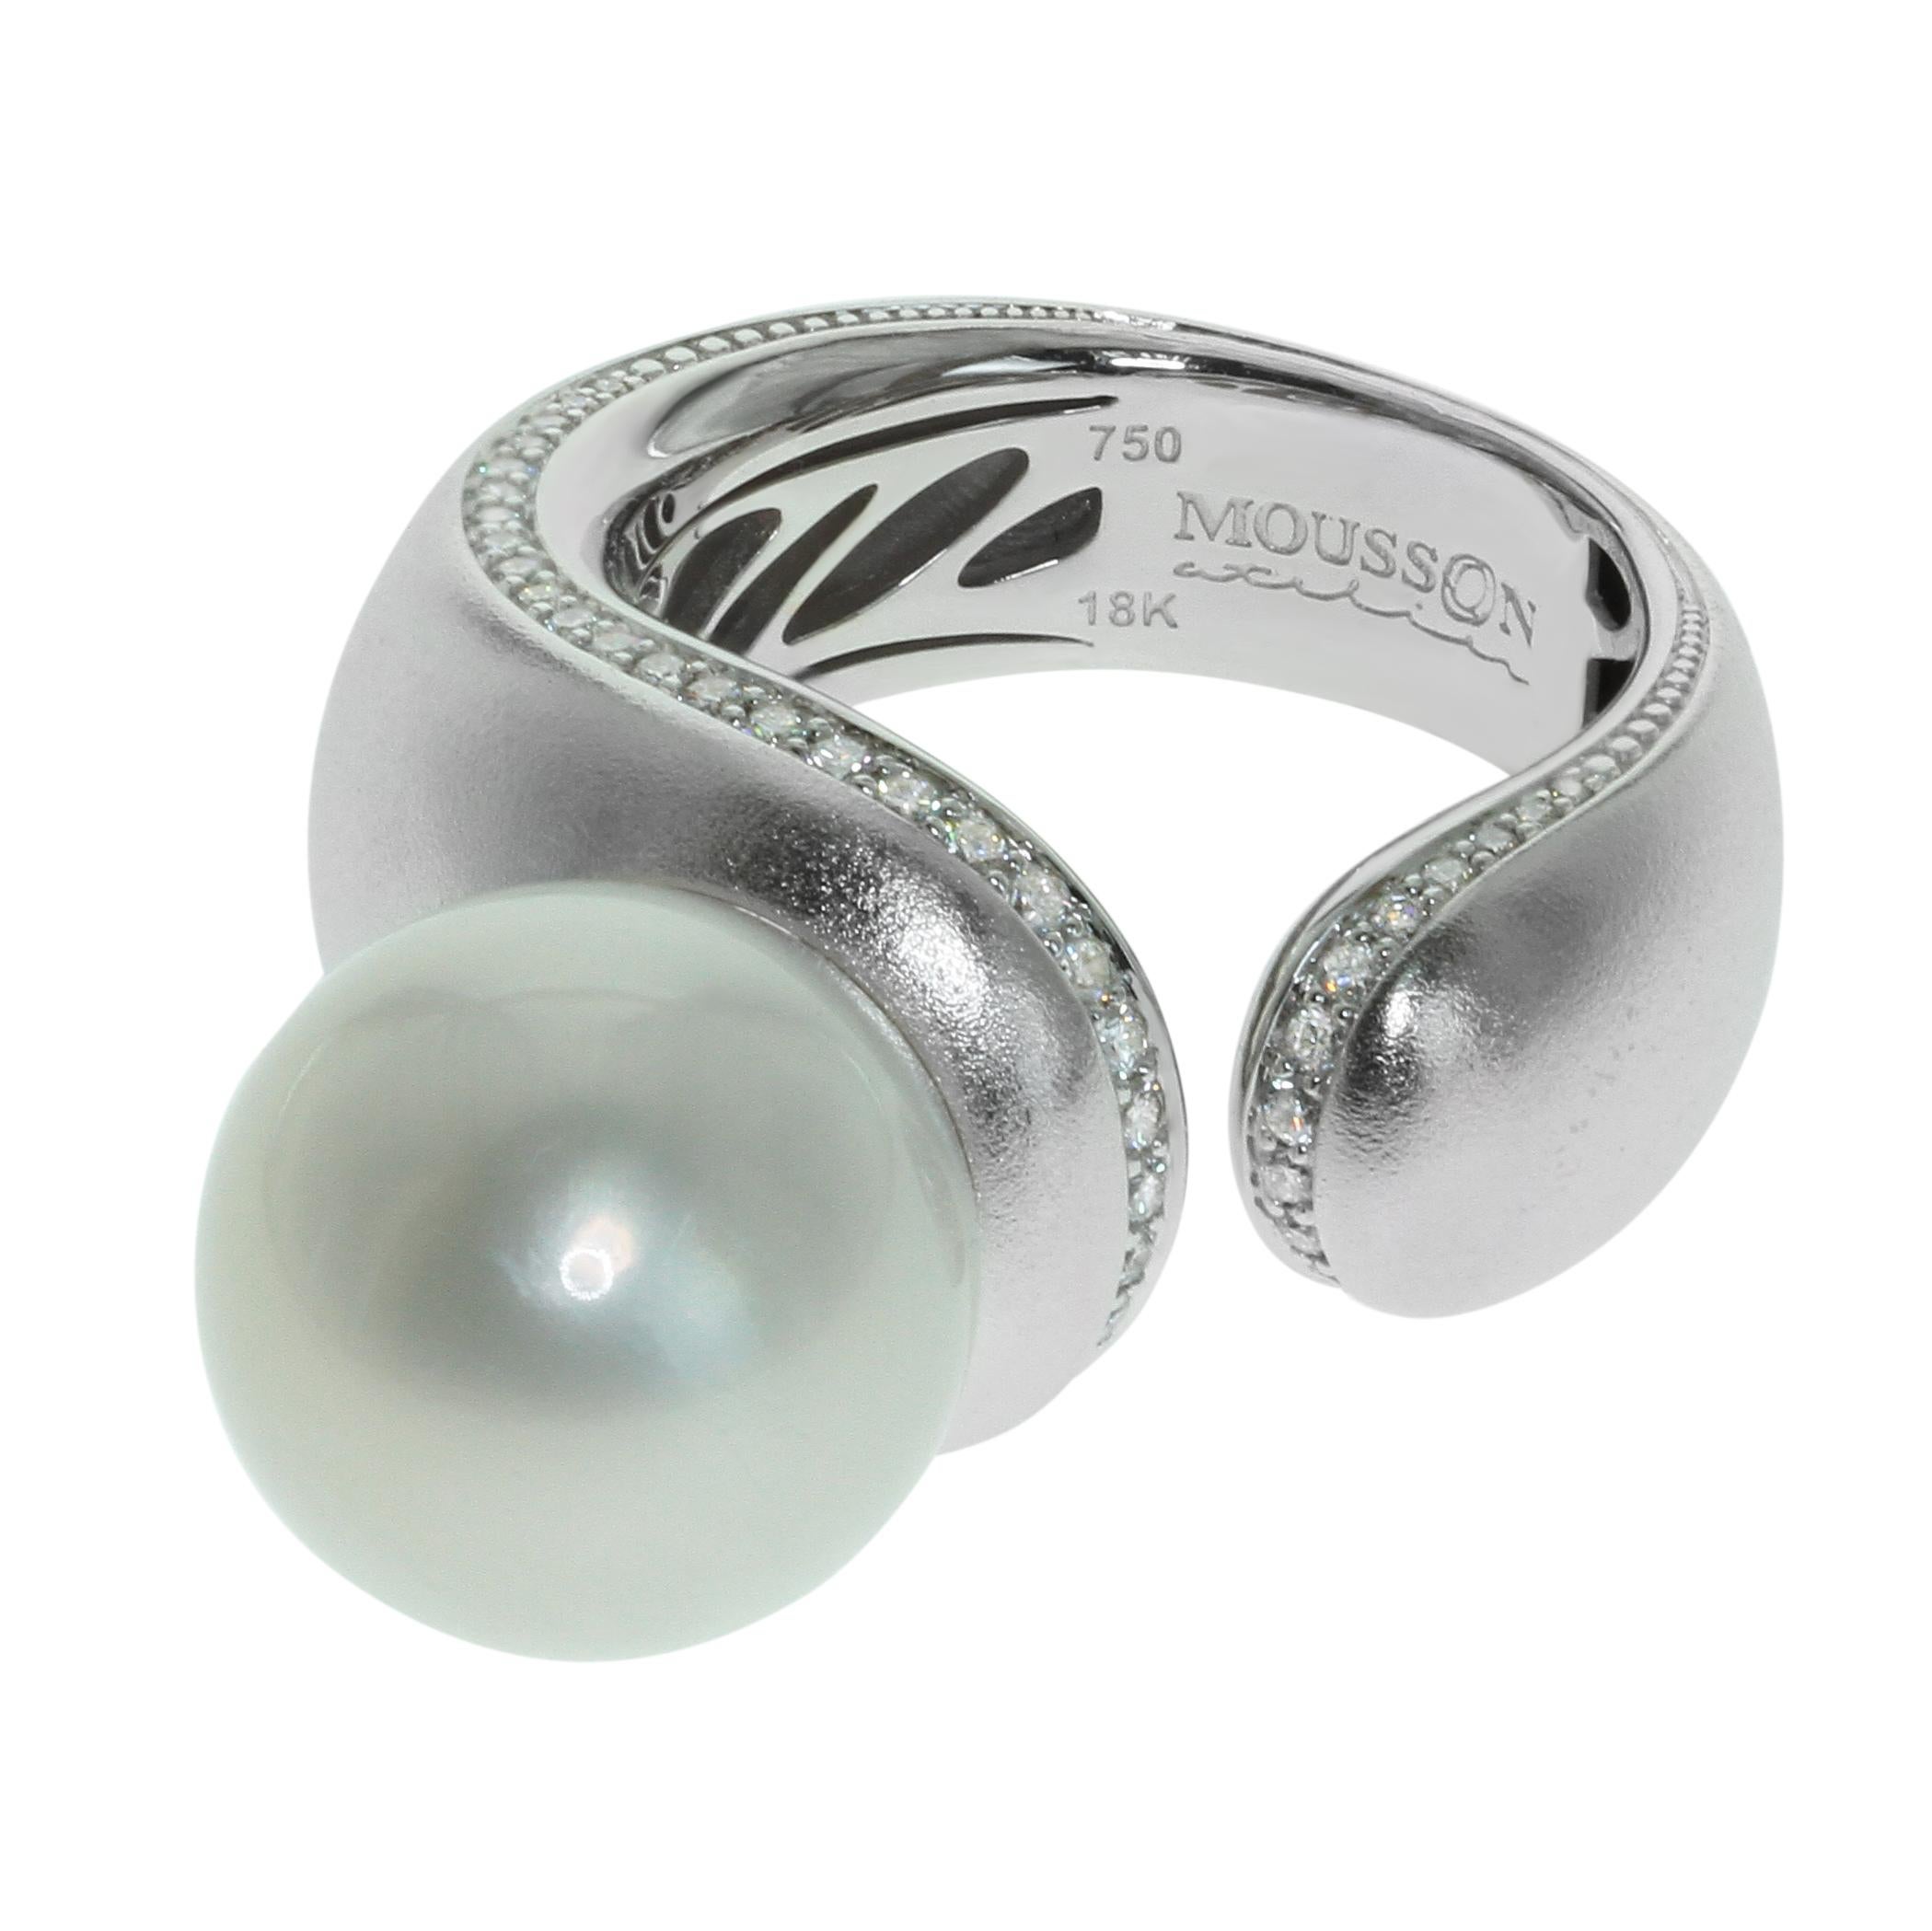 White South Sea Pearl Diamonds Cocktail Ring
Very comfortable Ring. Smooth design in combine with a smooth surface of a pearl gives perfect result. Pure white diamonds carefully selected to support the pearl color. Pure triumph of White!!!
Please